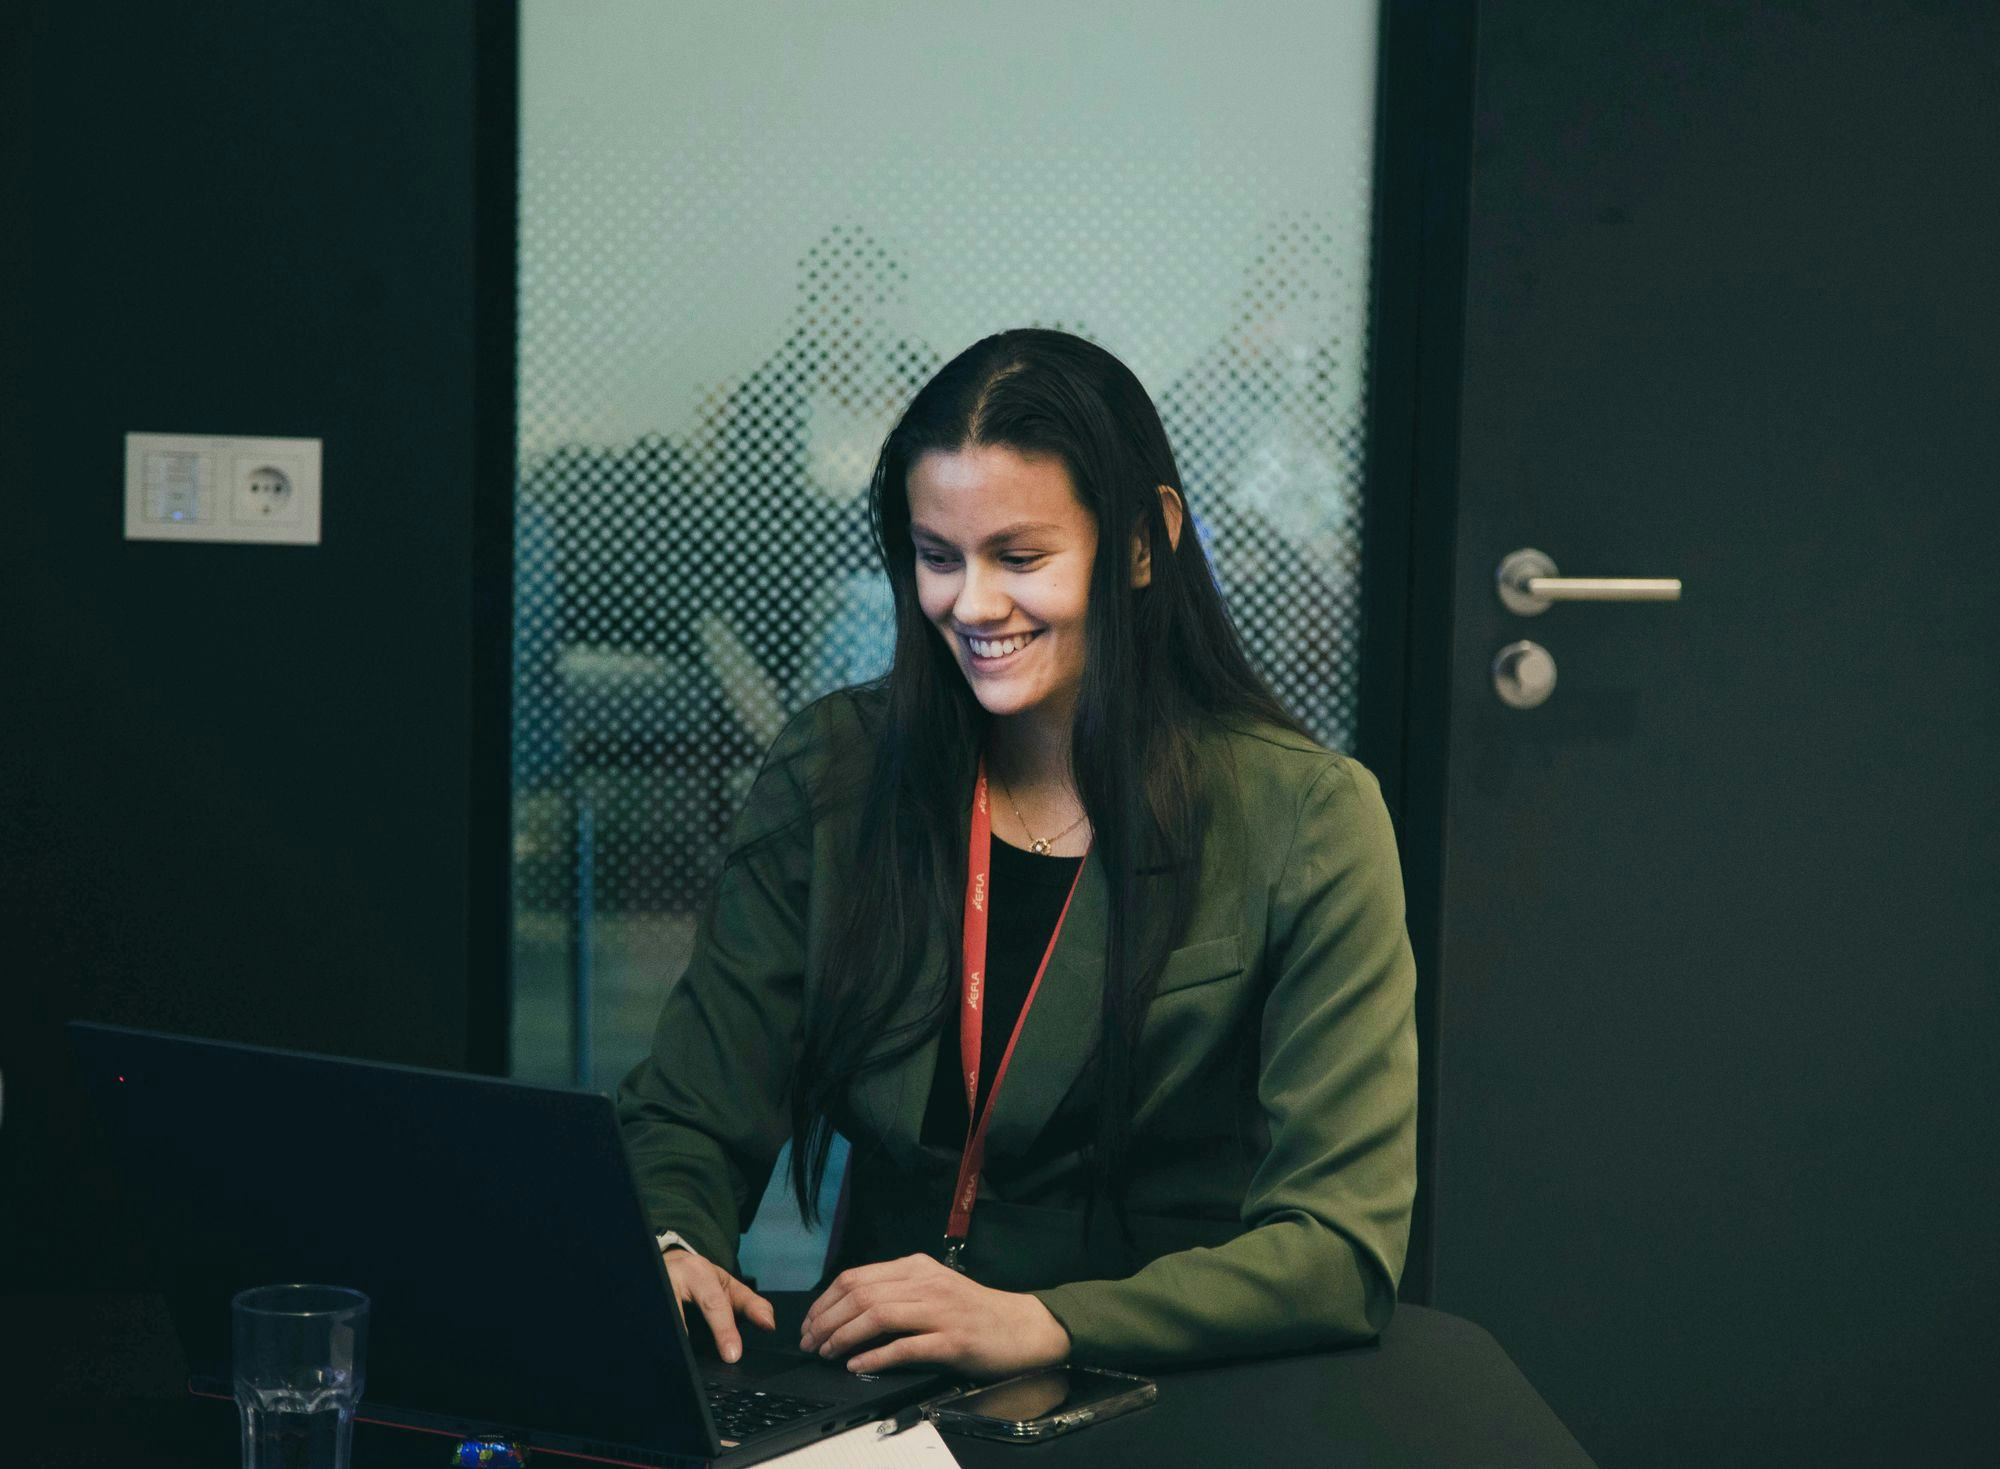 A young woman working on a laptop smiling and looking at the screen